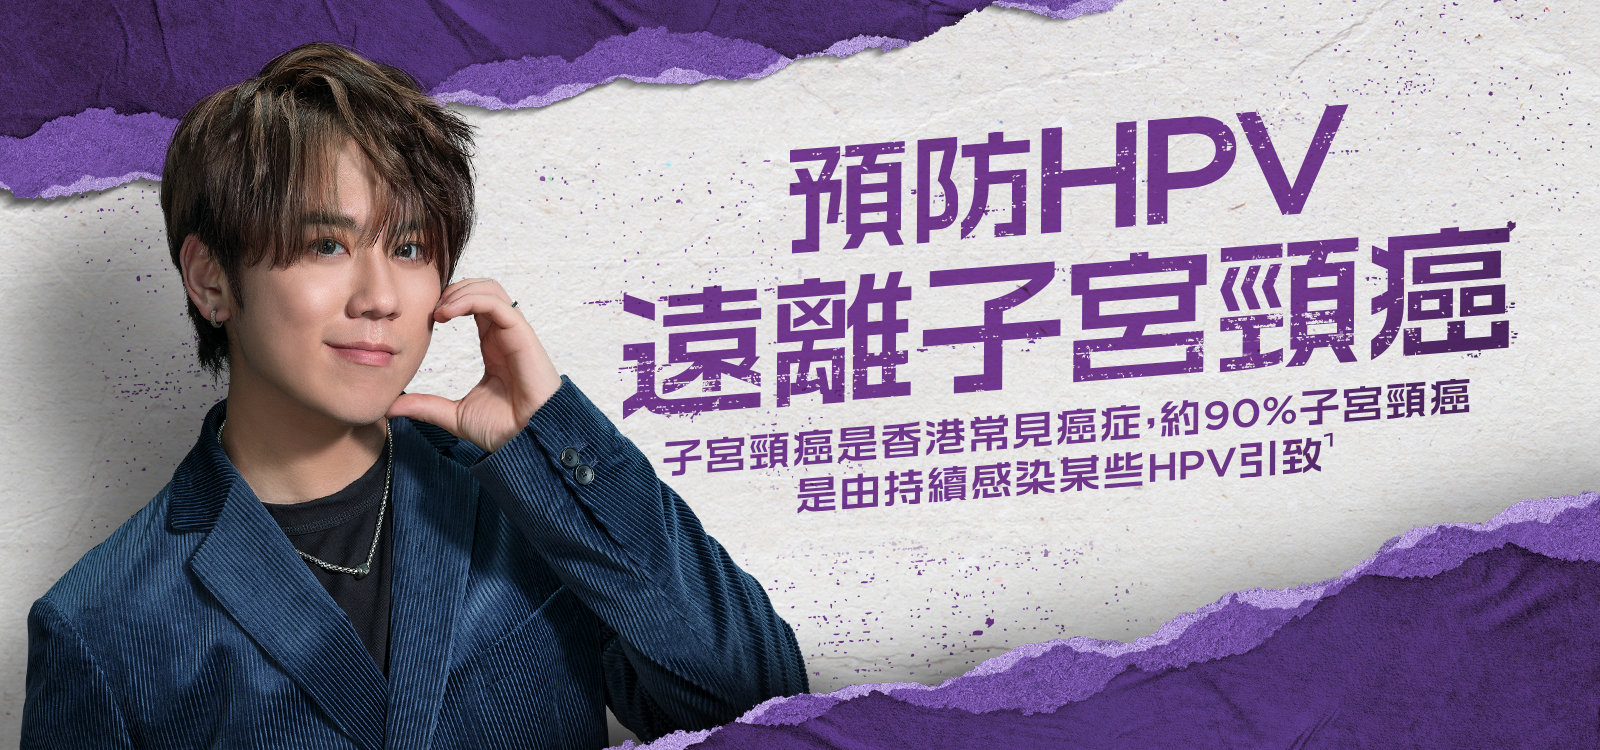 Keung To making a heart sign on his face in front of grey background, with touch of purple teared paper